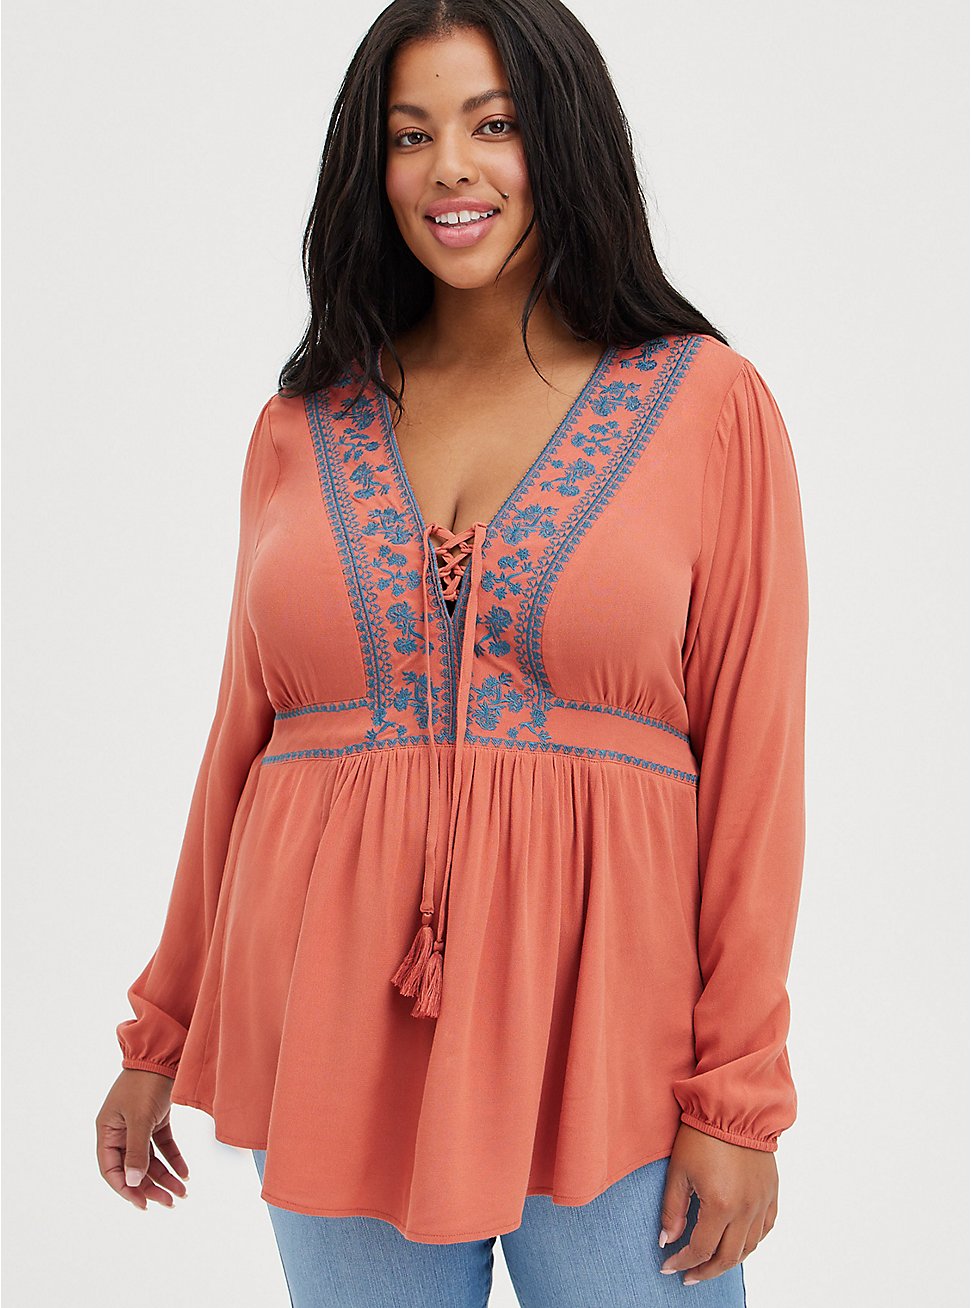 Babydoll Rayon Crepe Embroidered Lace-Up Top, REDWOOD, hi-res